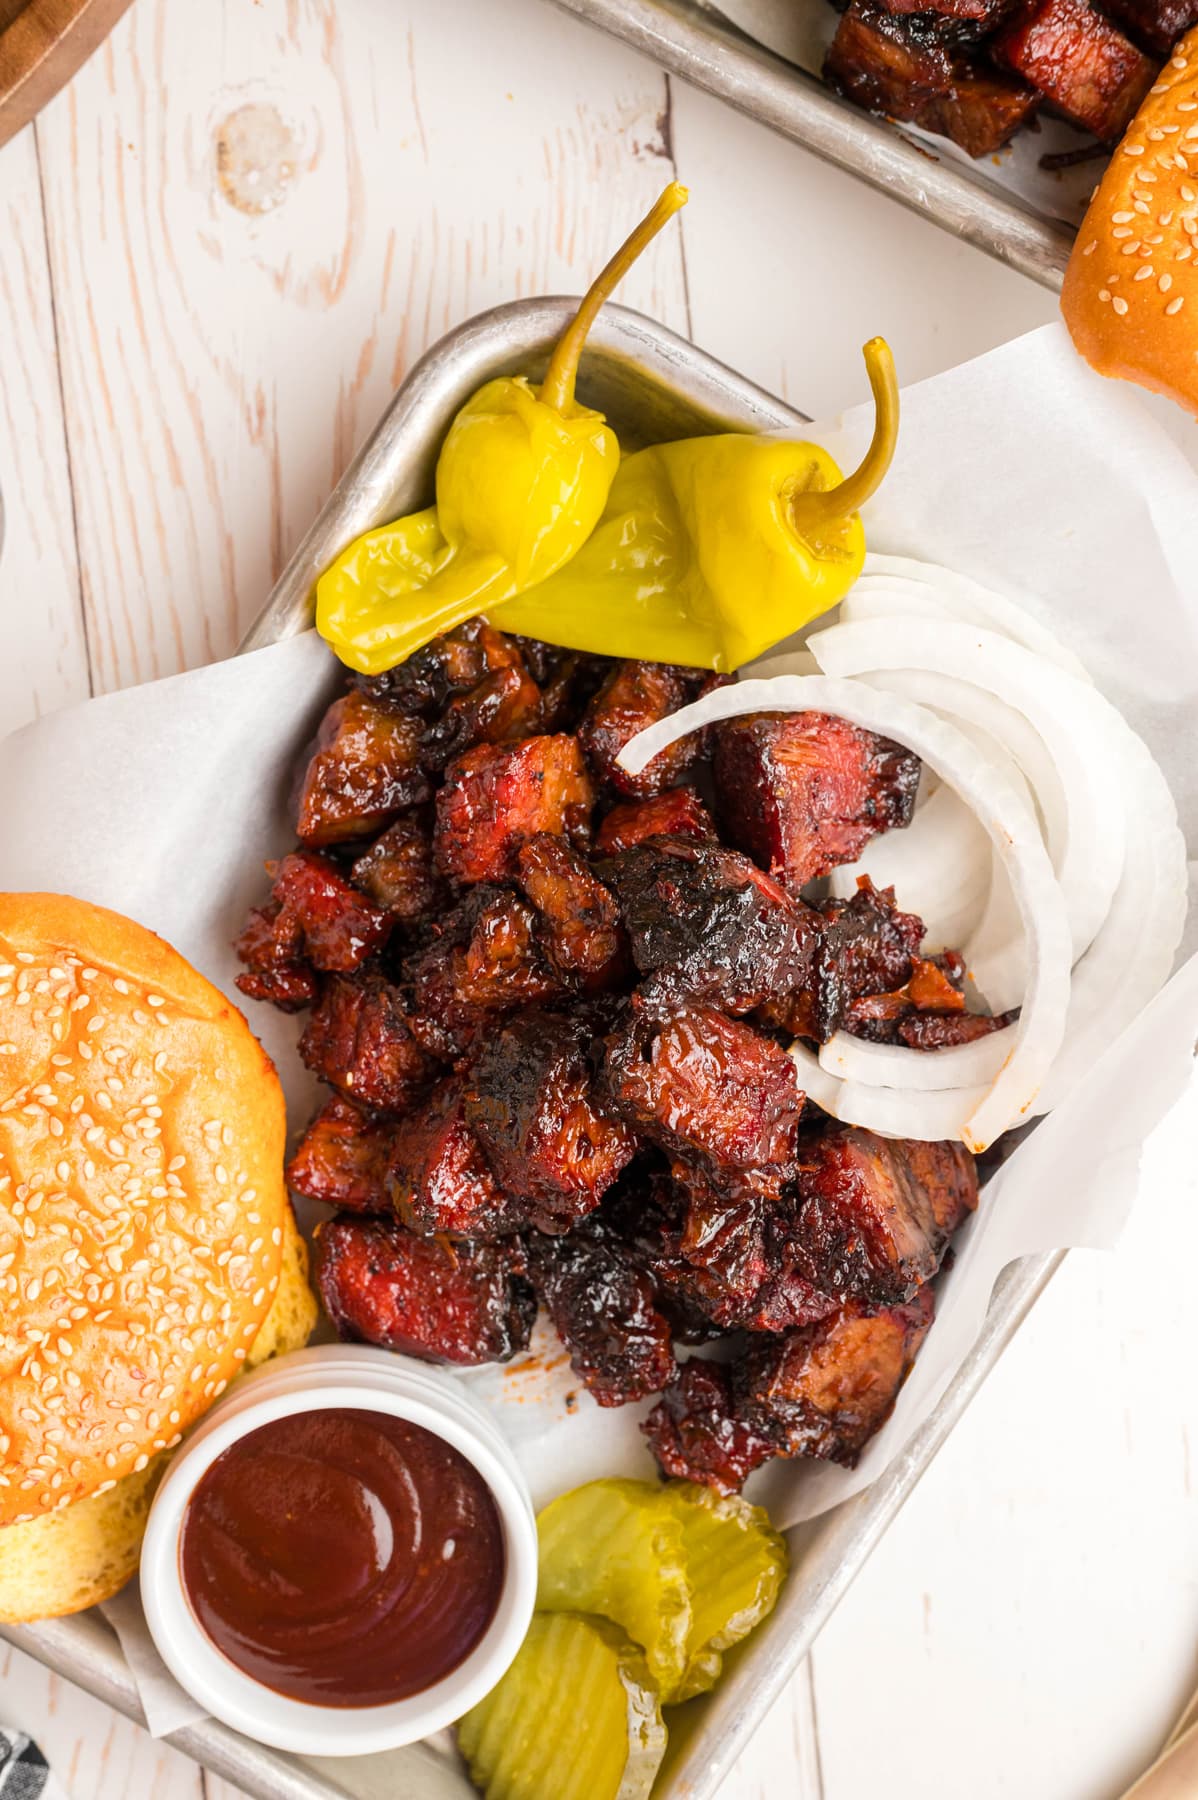 Overhead view of poor man's burnt ends with a burger bun